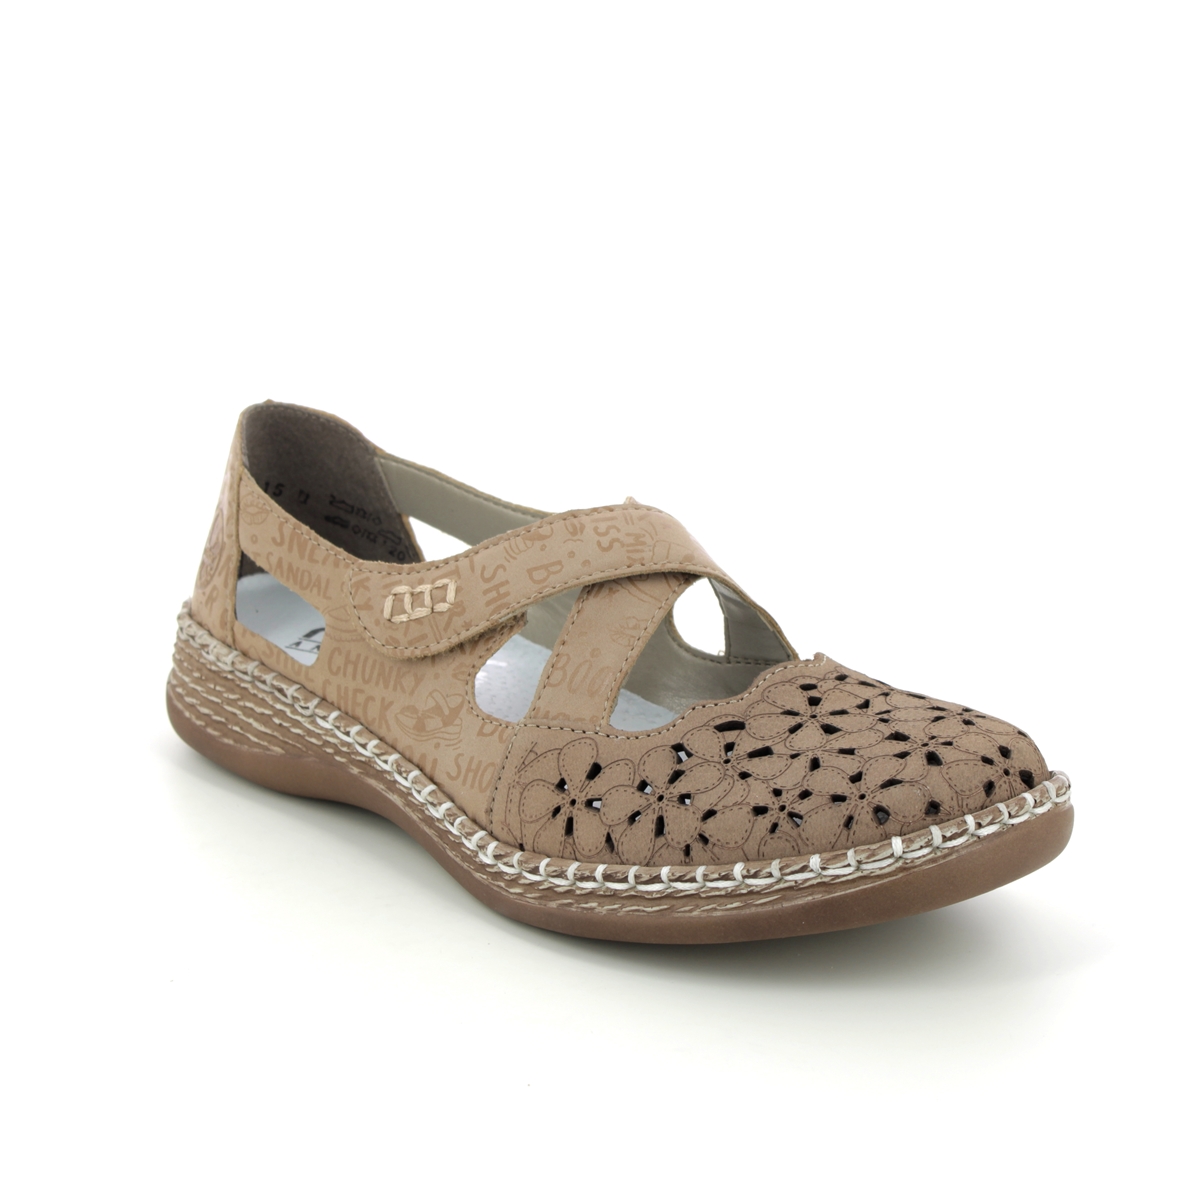 Rieker Daisbeki Light Taupe Leather Womens Mary Jane Shoes 464H4-62 In Size 36 In Plain Light Taupe Leather